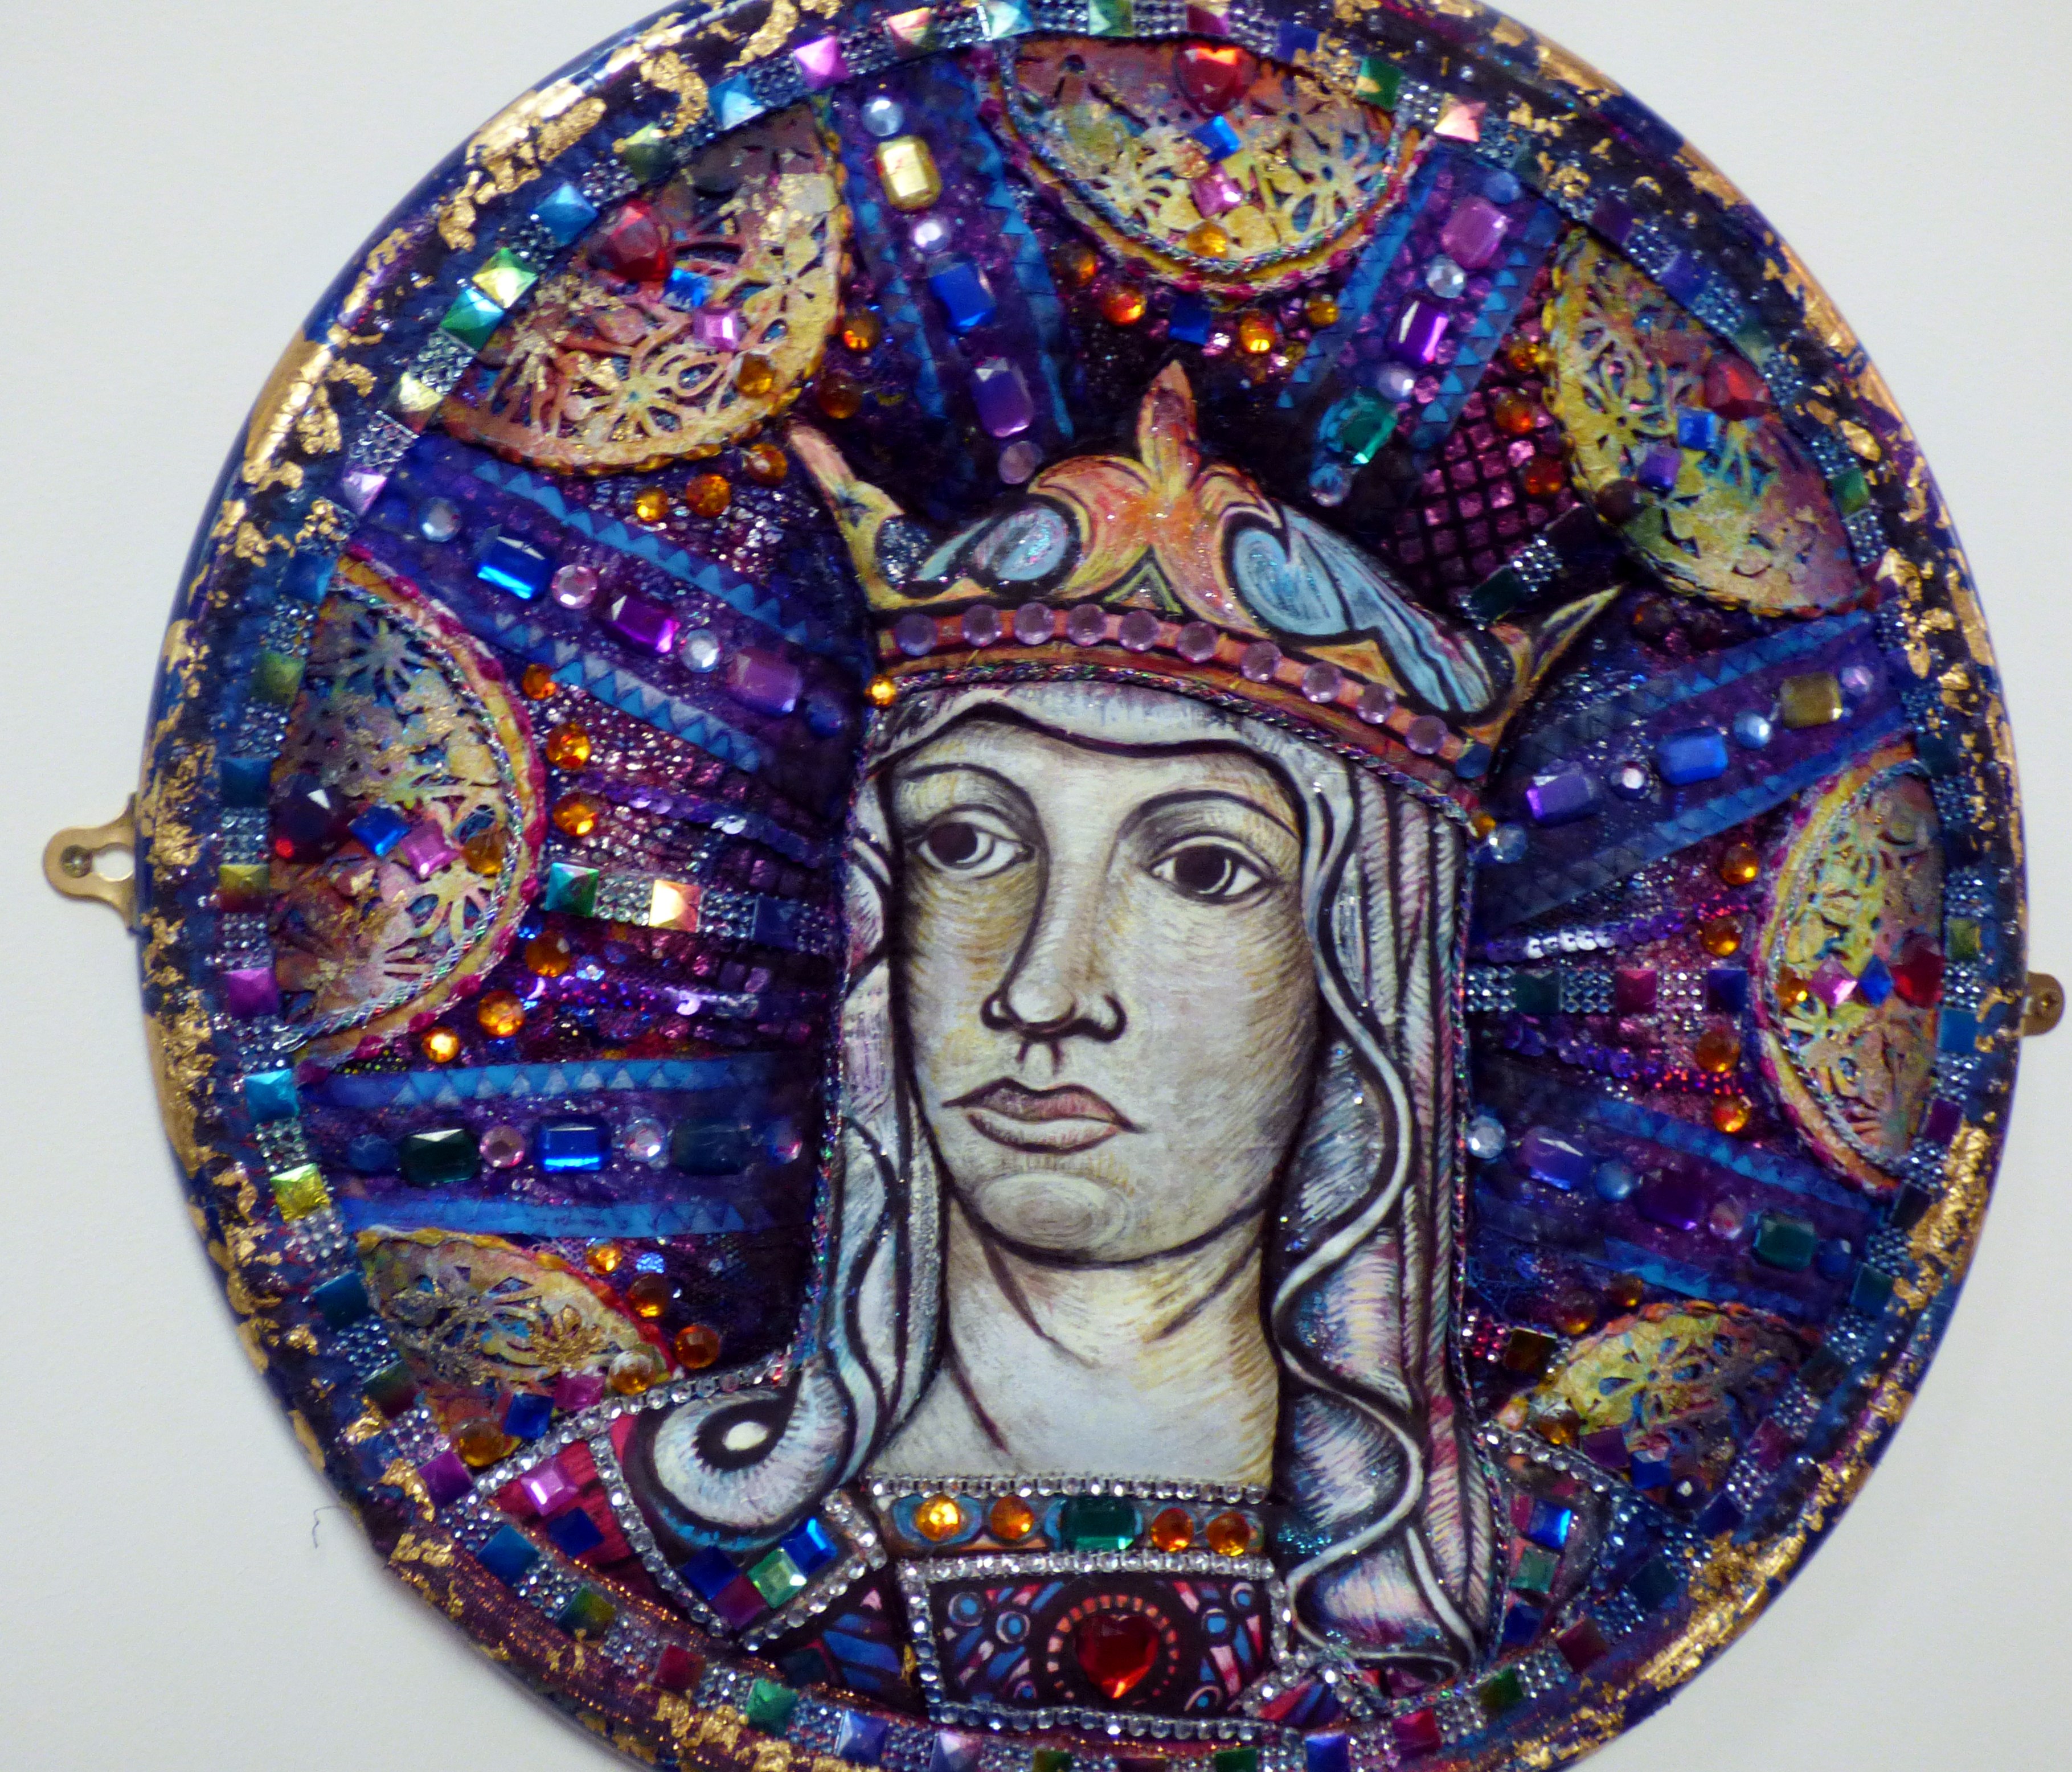 SAINT ETHELDREDA by Nikki Parmenter, mixed media, In All Its Glory exhibition, Chester Cathedral 2016